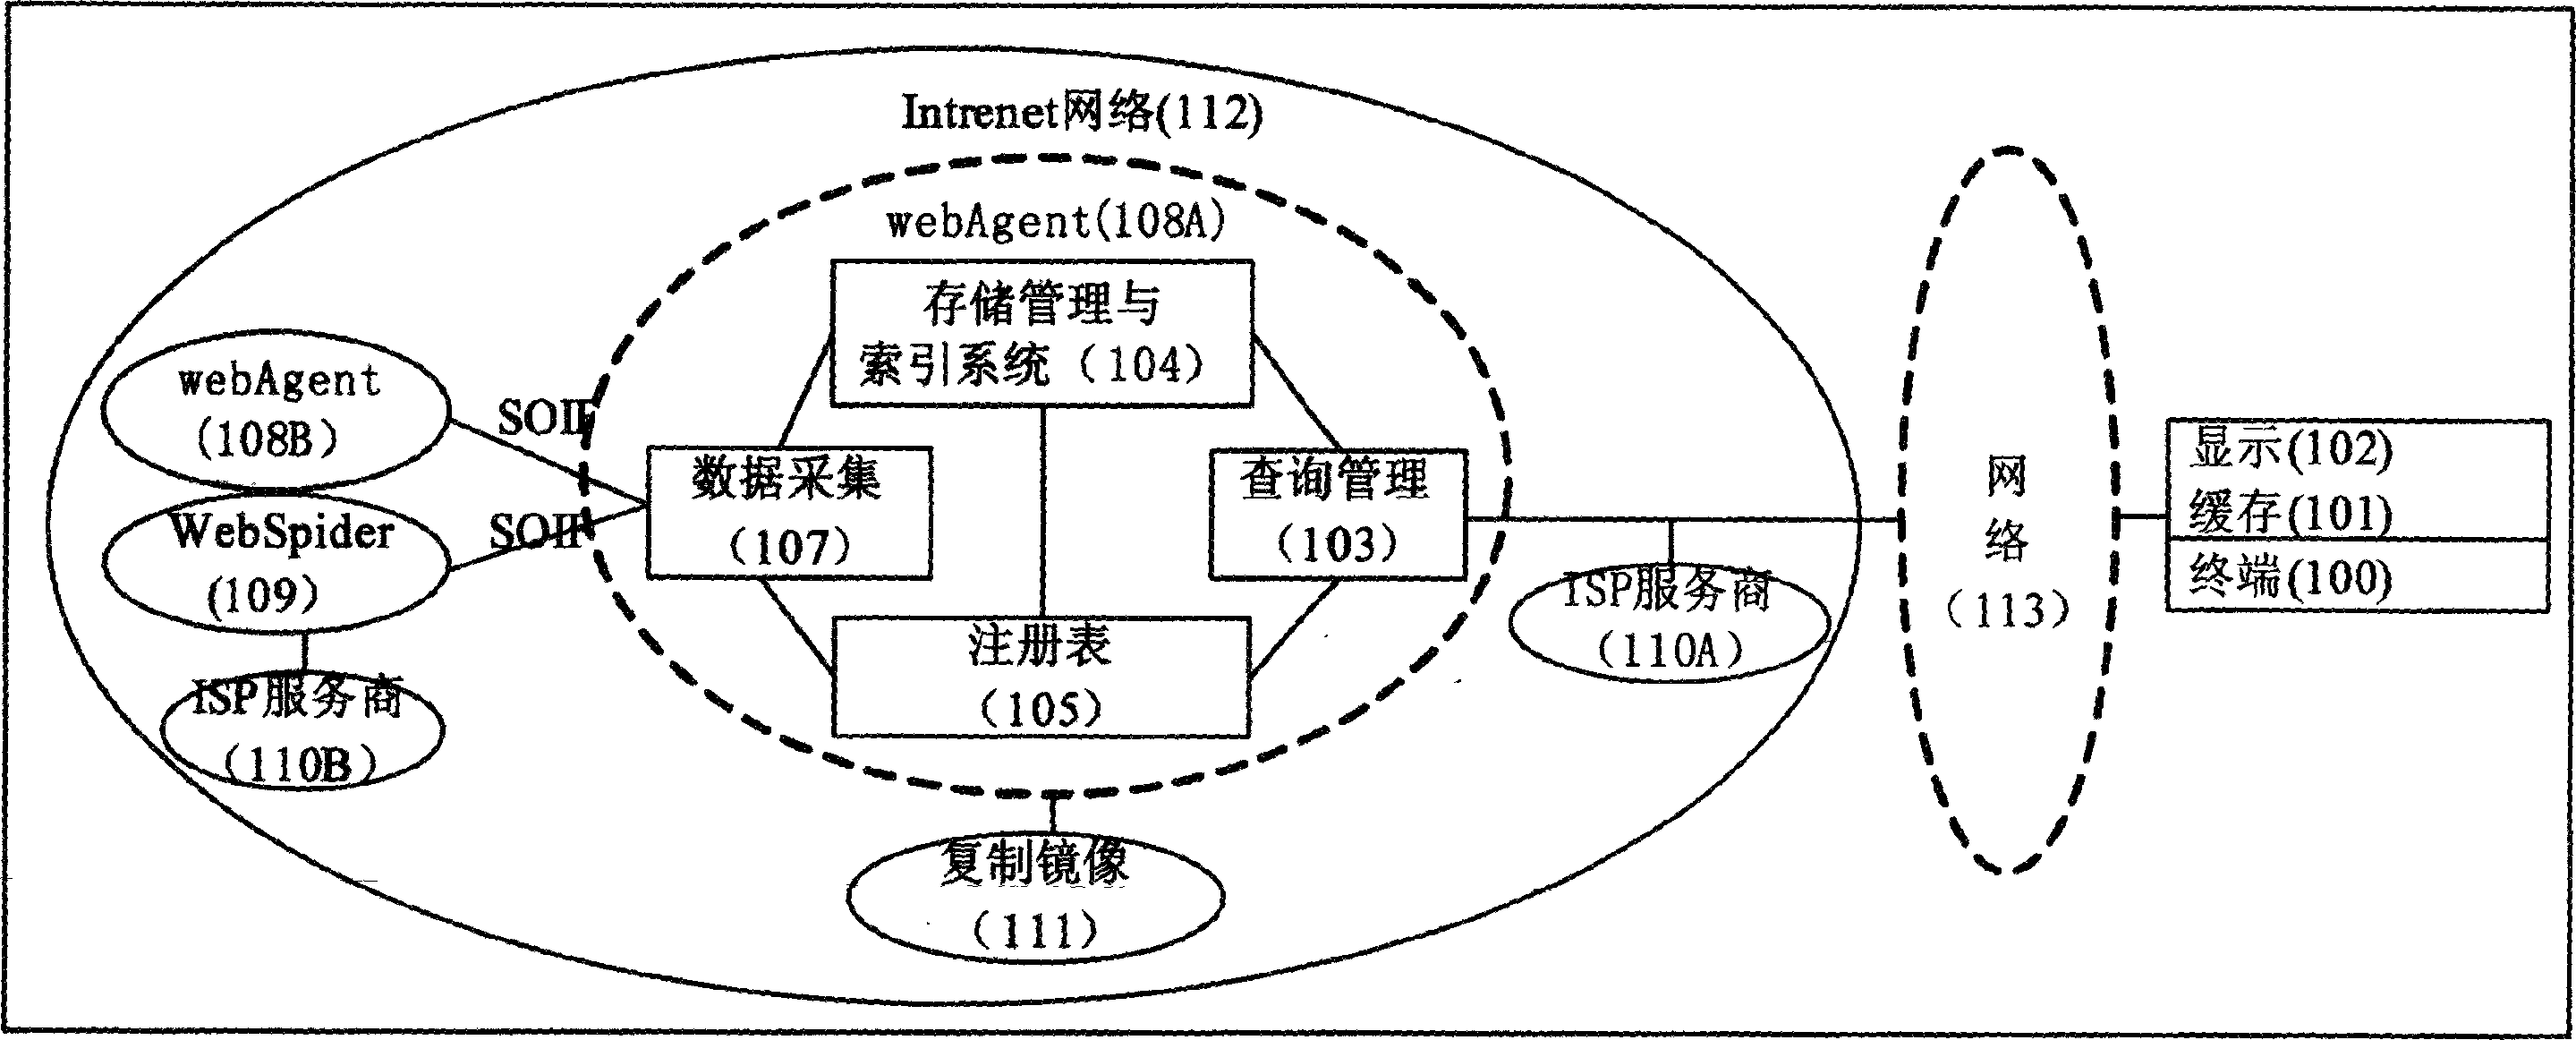 Network cache management system and method